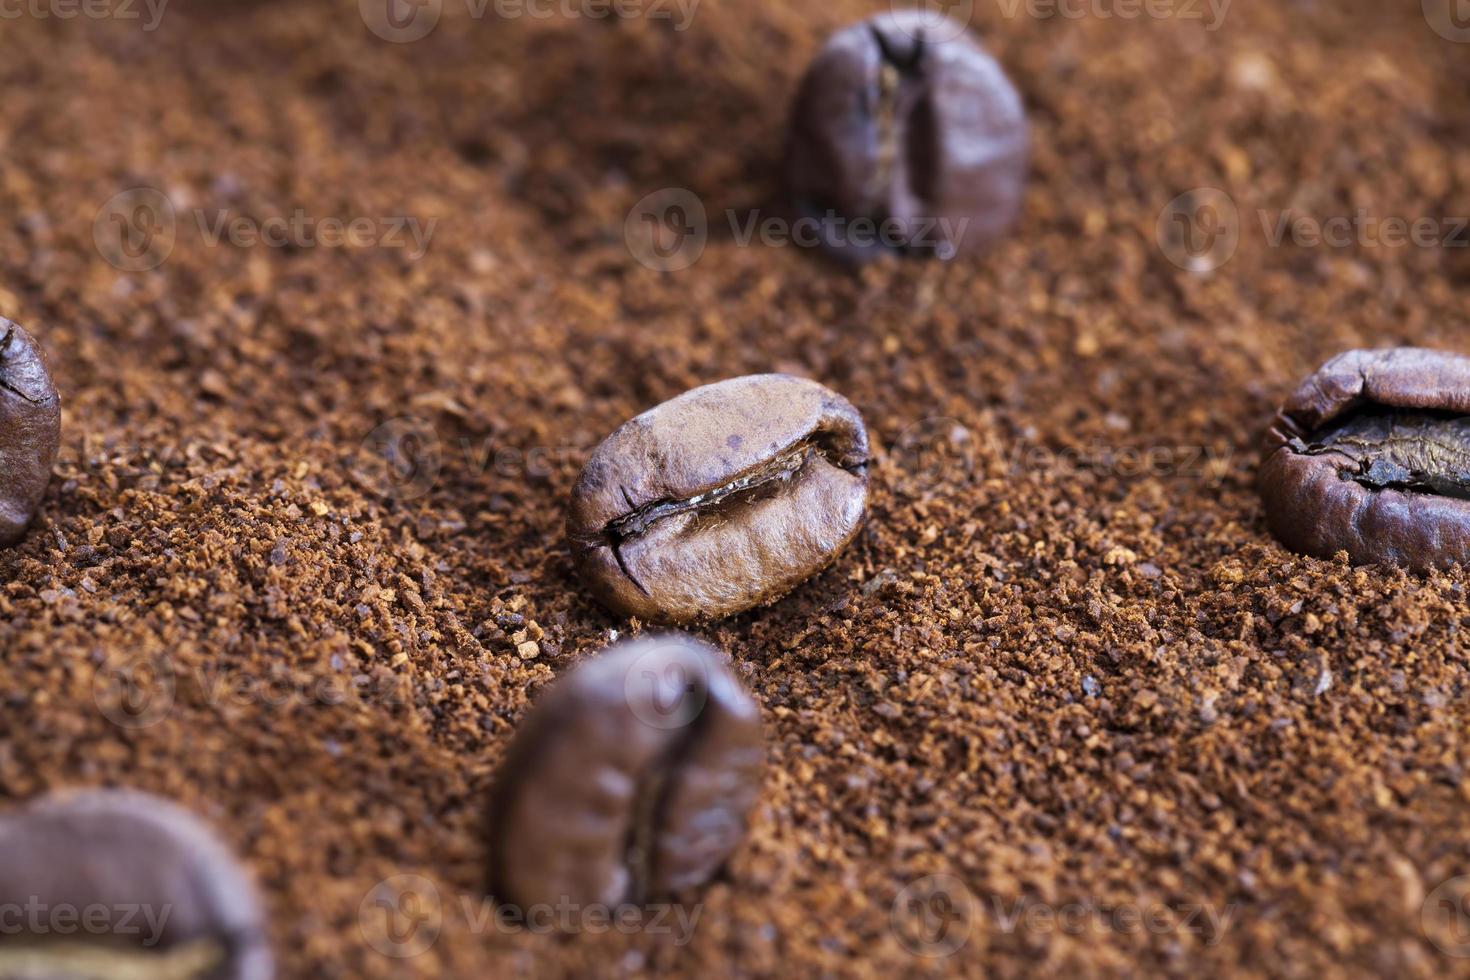 https://static.vecteezy.com/system/resources/previews/009/719/699/non_2x/roasted-coffee-beans-are-placed-on-ground-coffee-photo.jpg